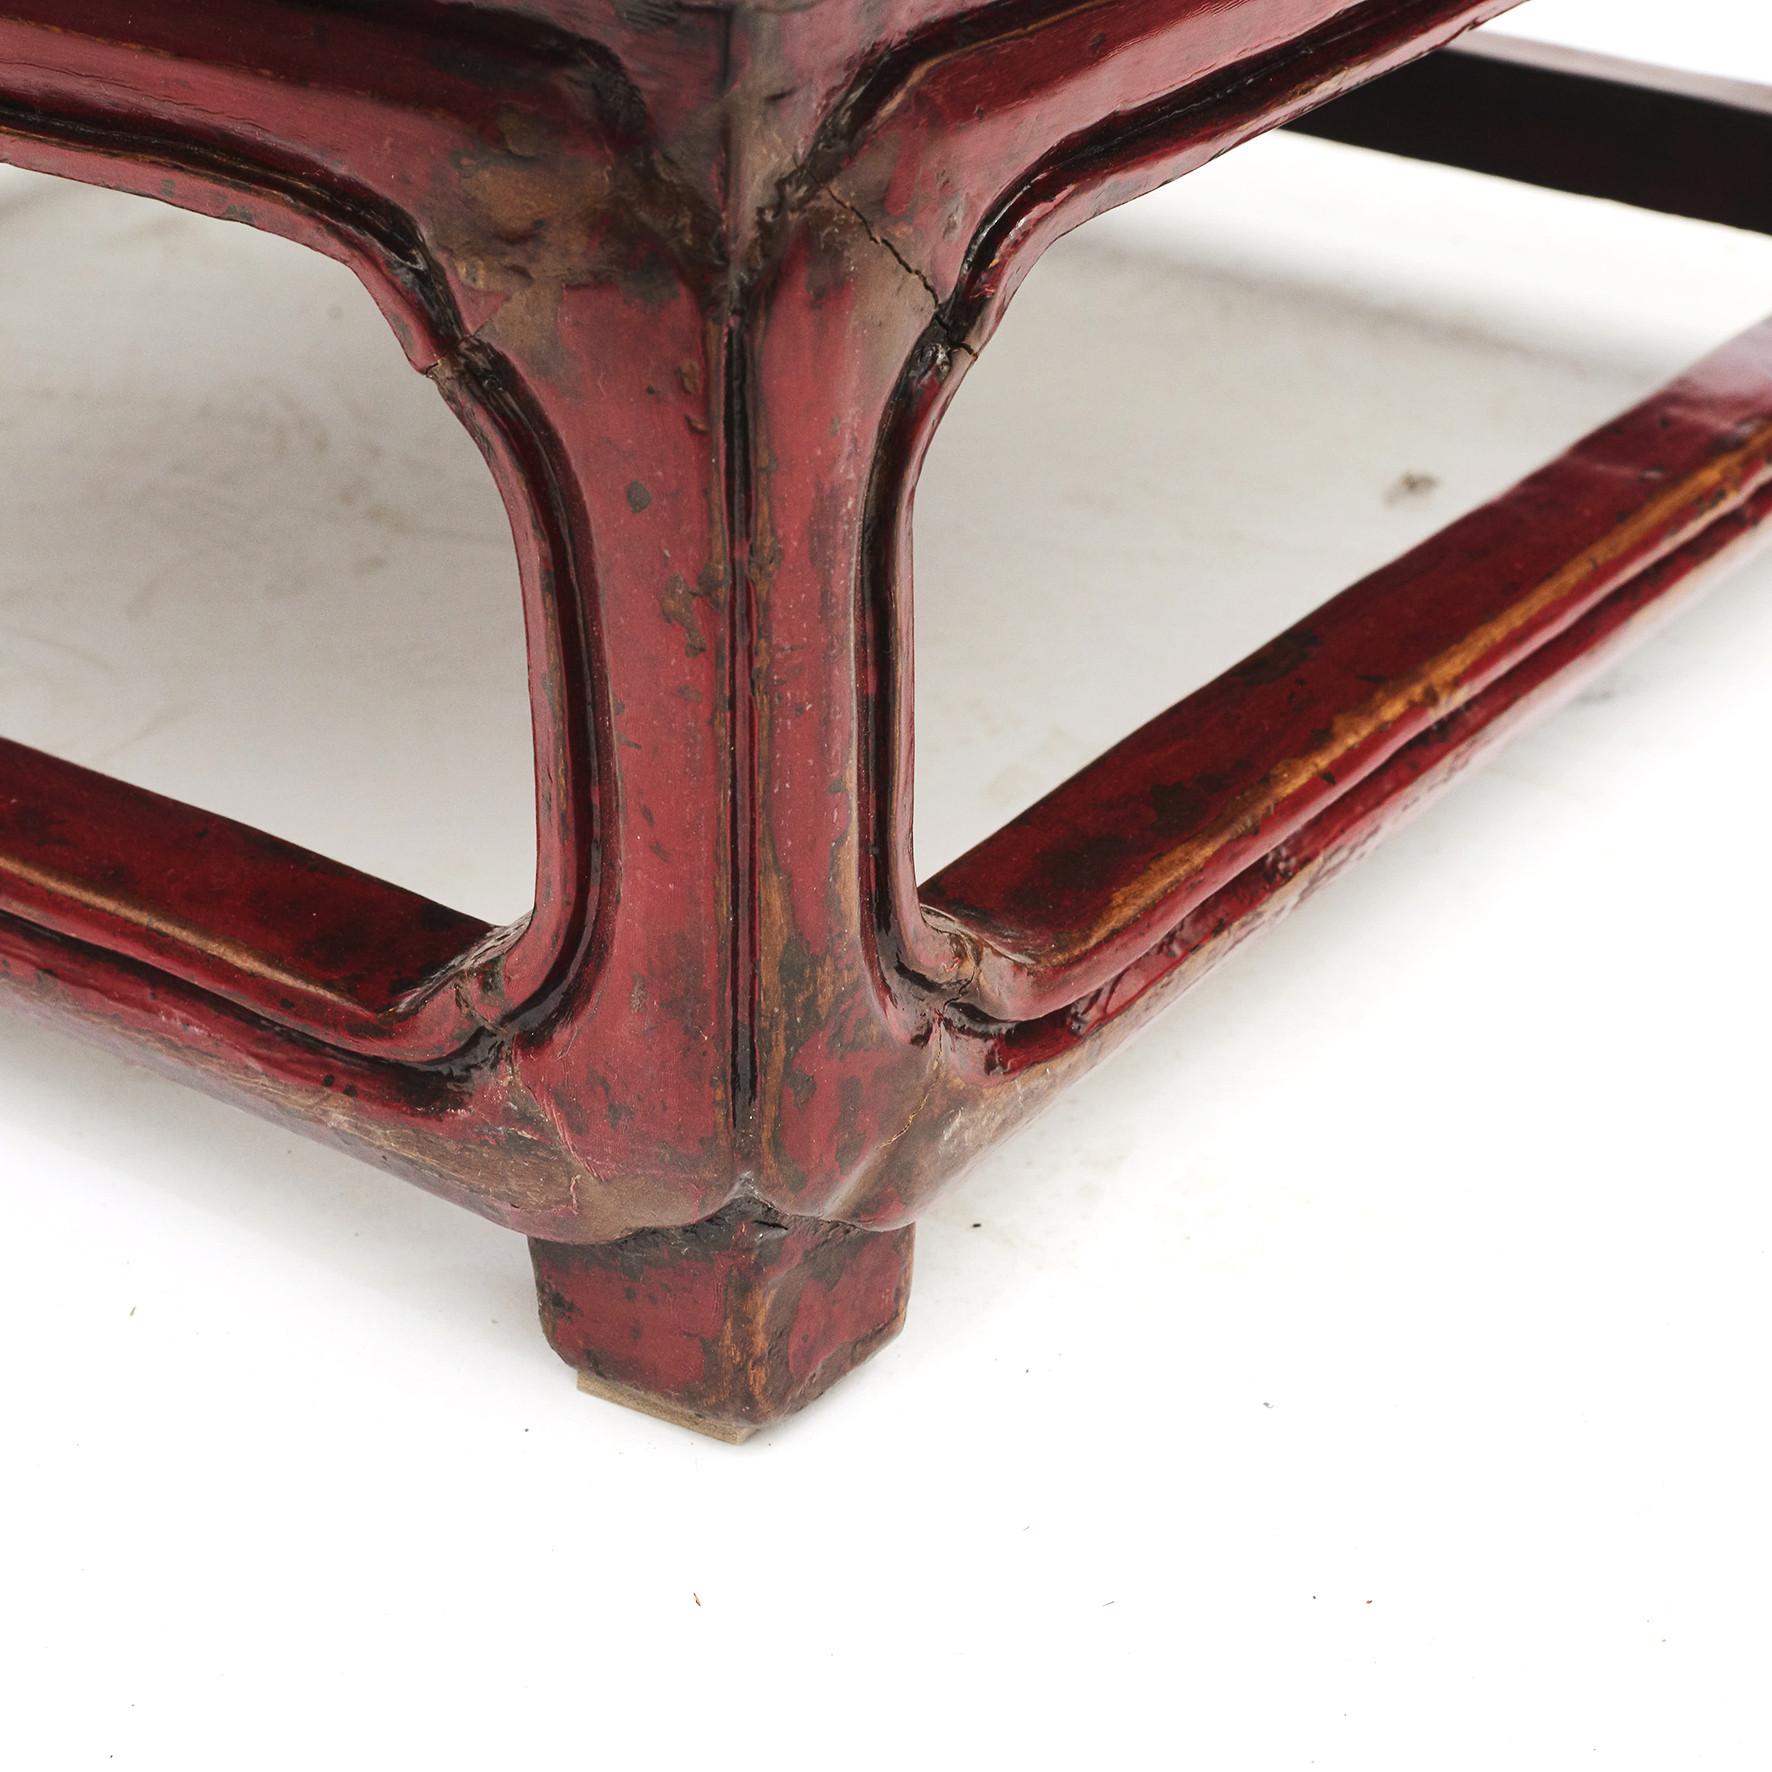 19th Century Chinese Red Lacquer Kang Table, Manchuria, 1850-1870